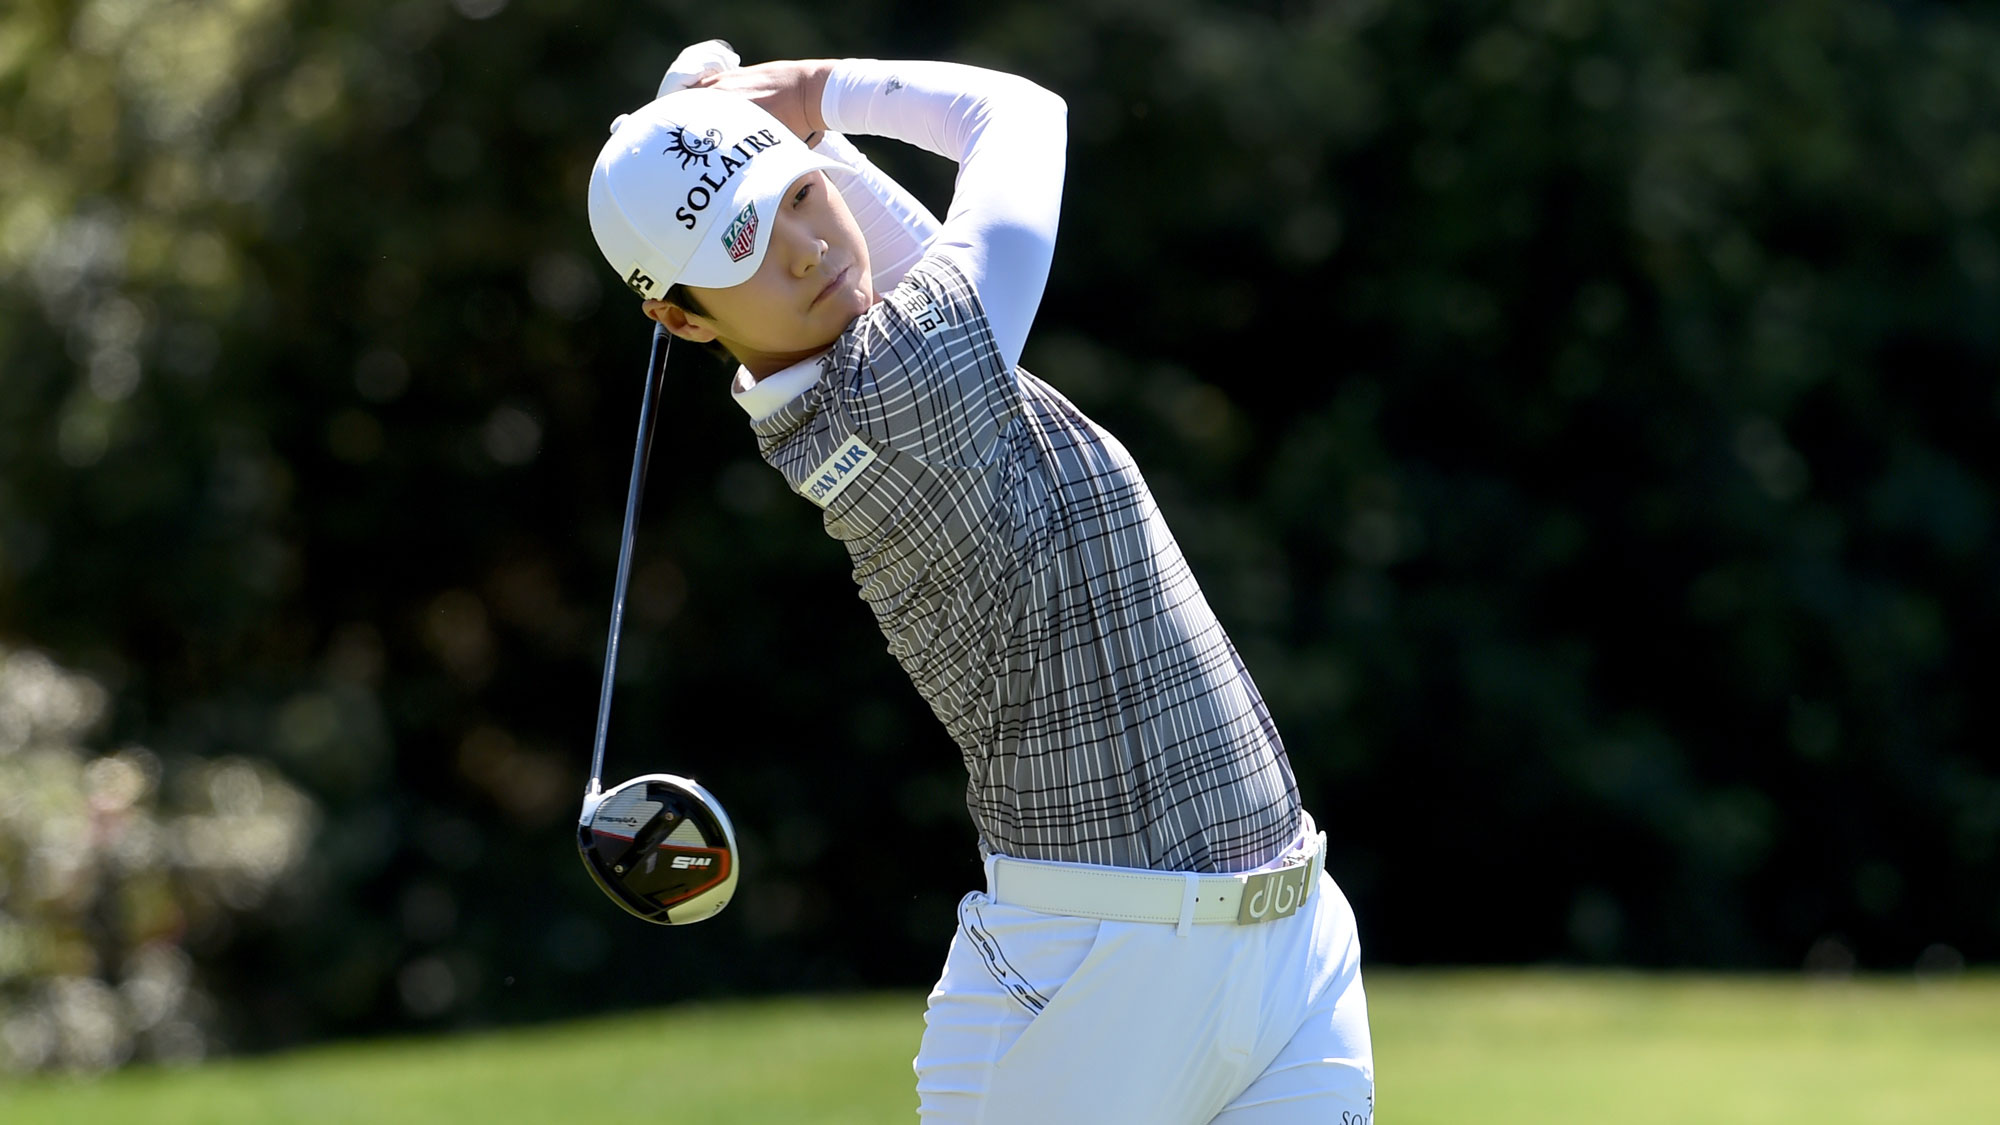 Sung Hyun Park of Korea hits his tee shot on the fourth hole during the third round of the Kia Classic